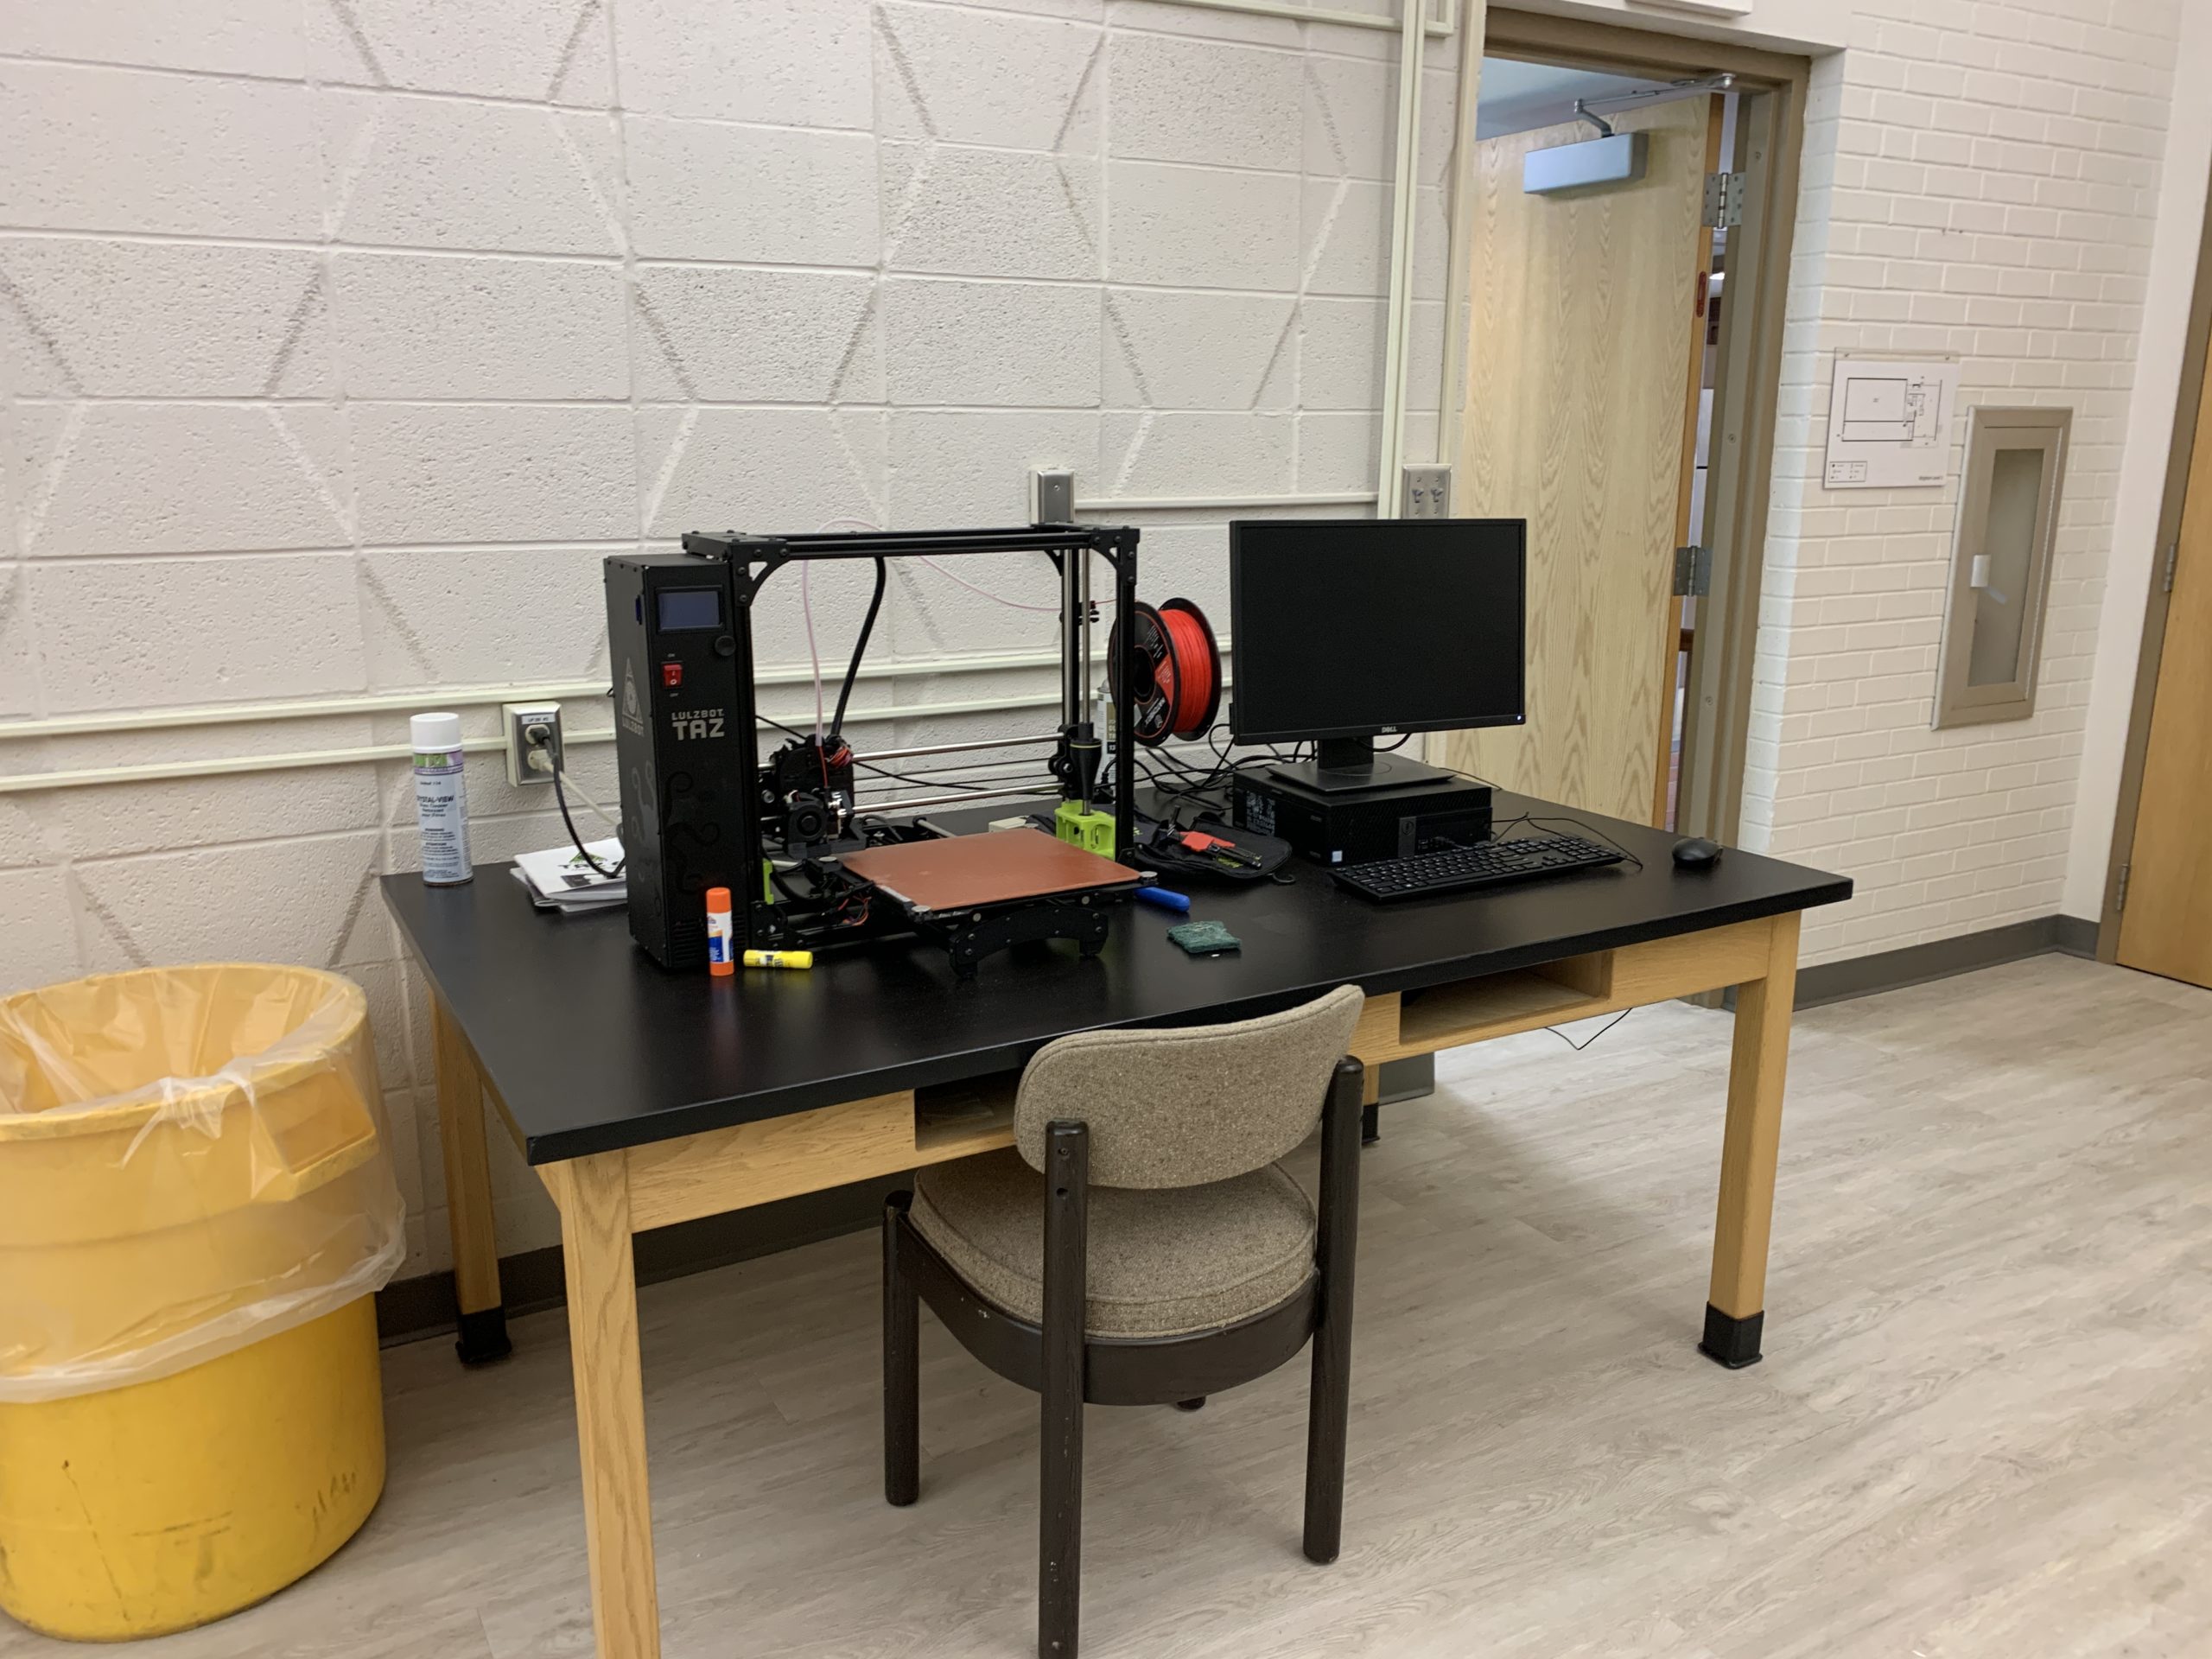 Makerspace 2 with 3D printer on desk